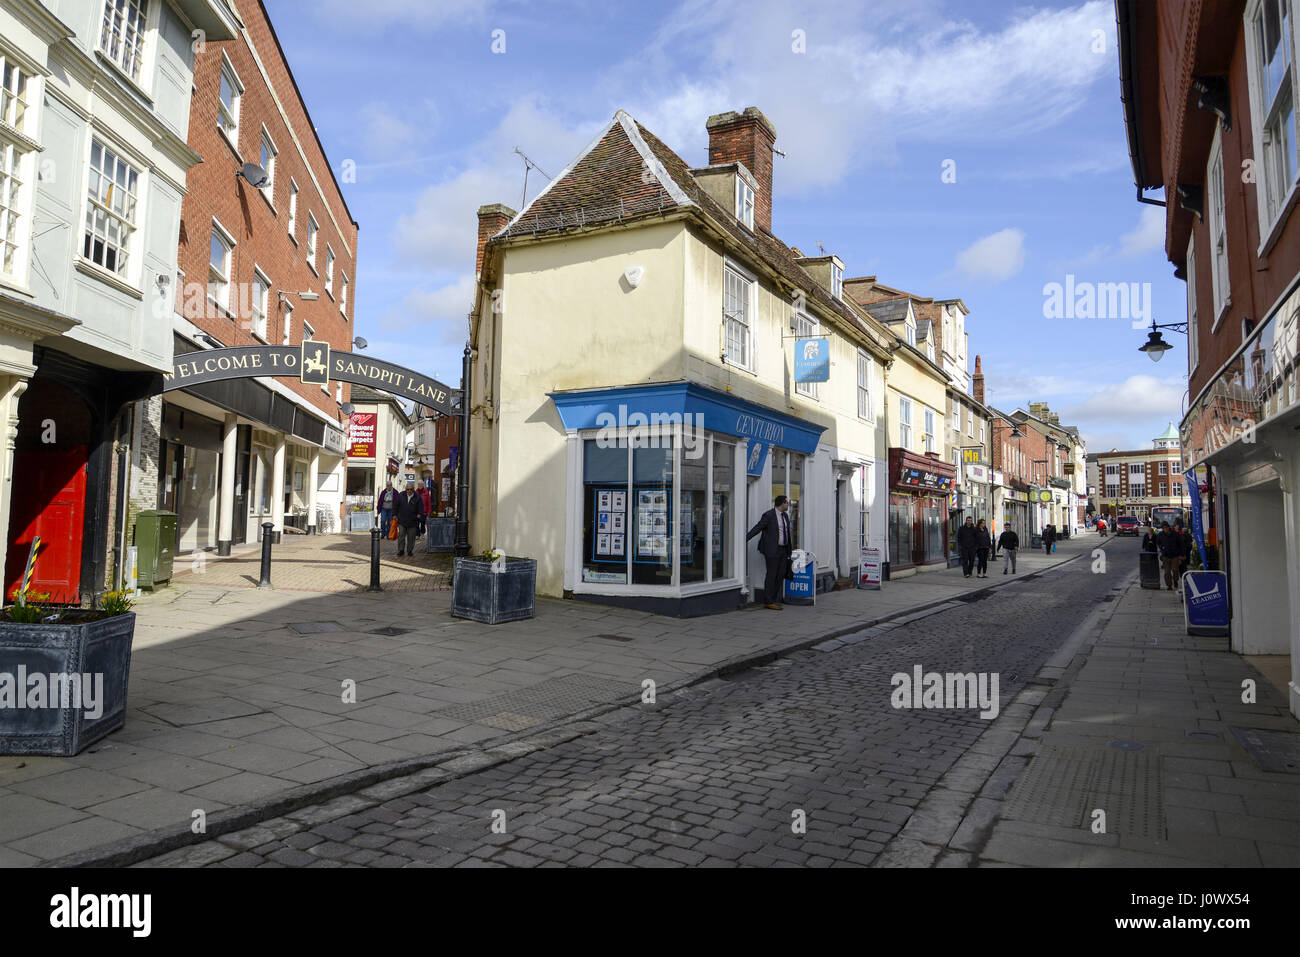 Junction of Sandpit Lane and High Street, Braintree, Essex Stock Photo